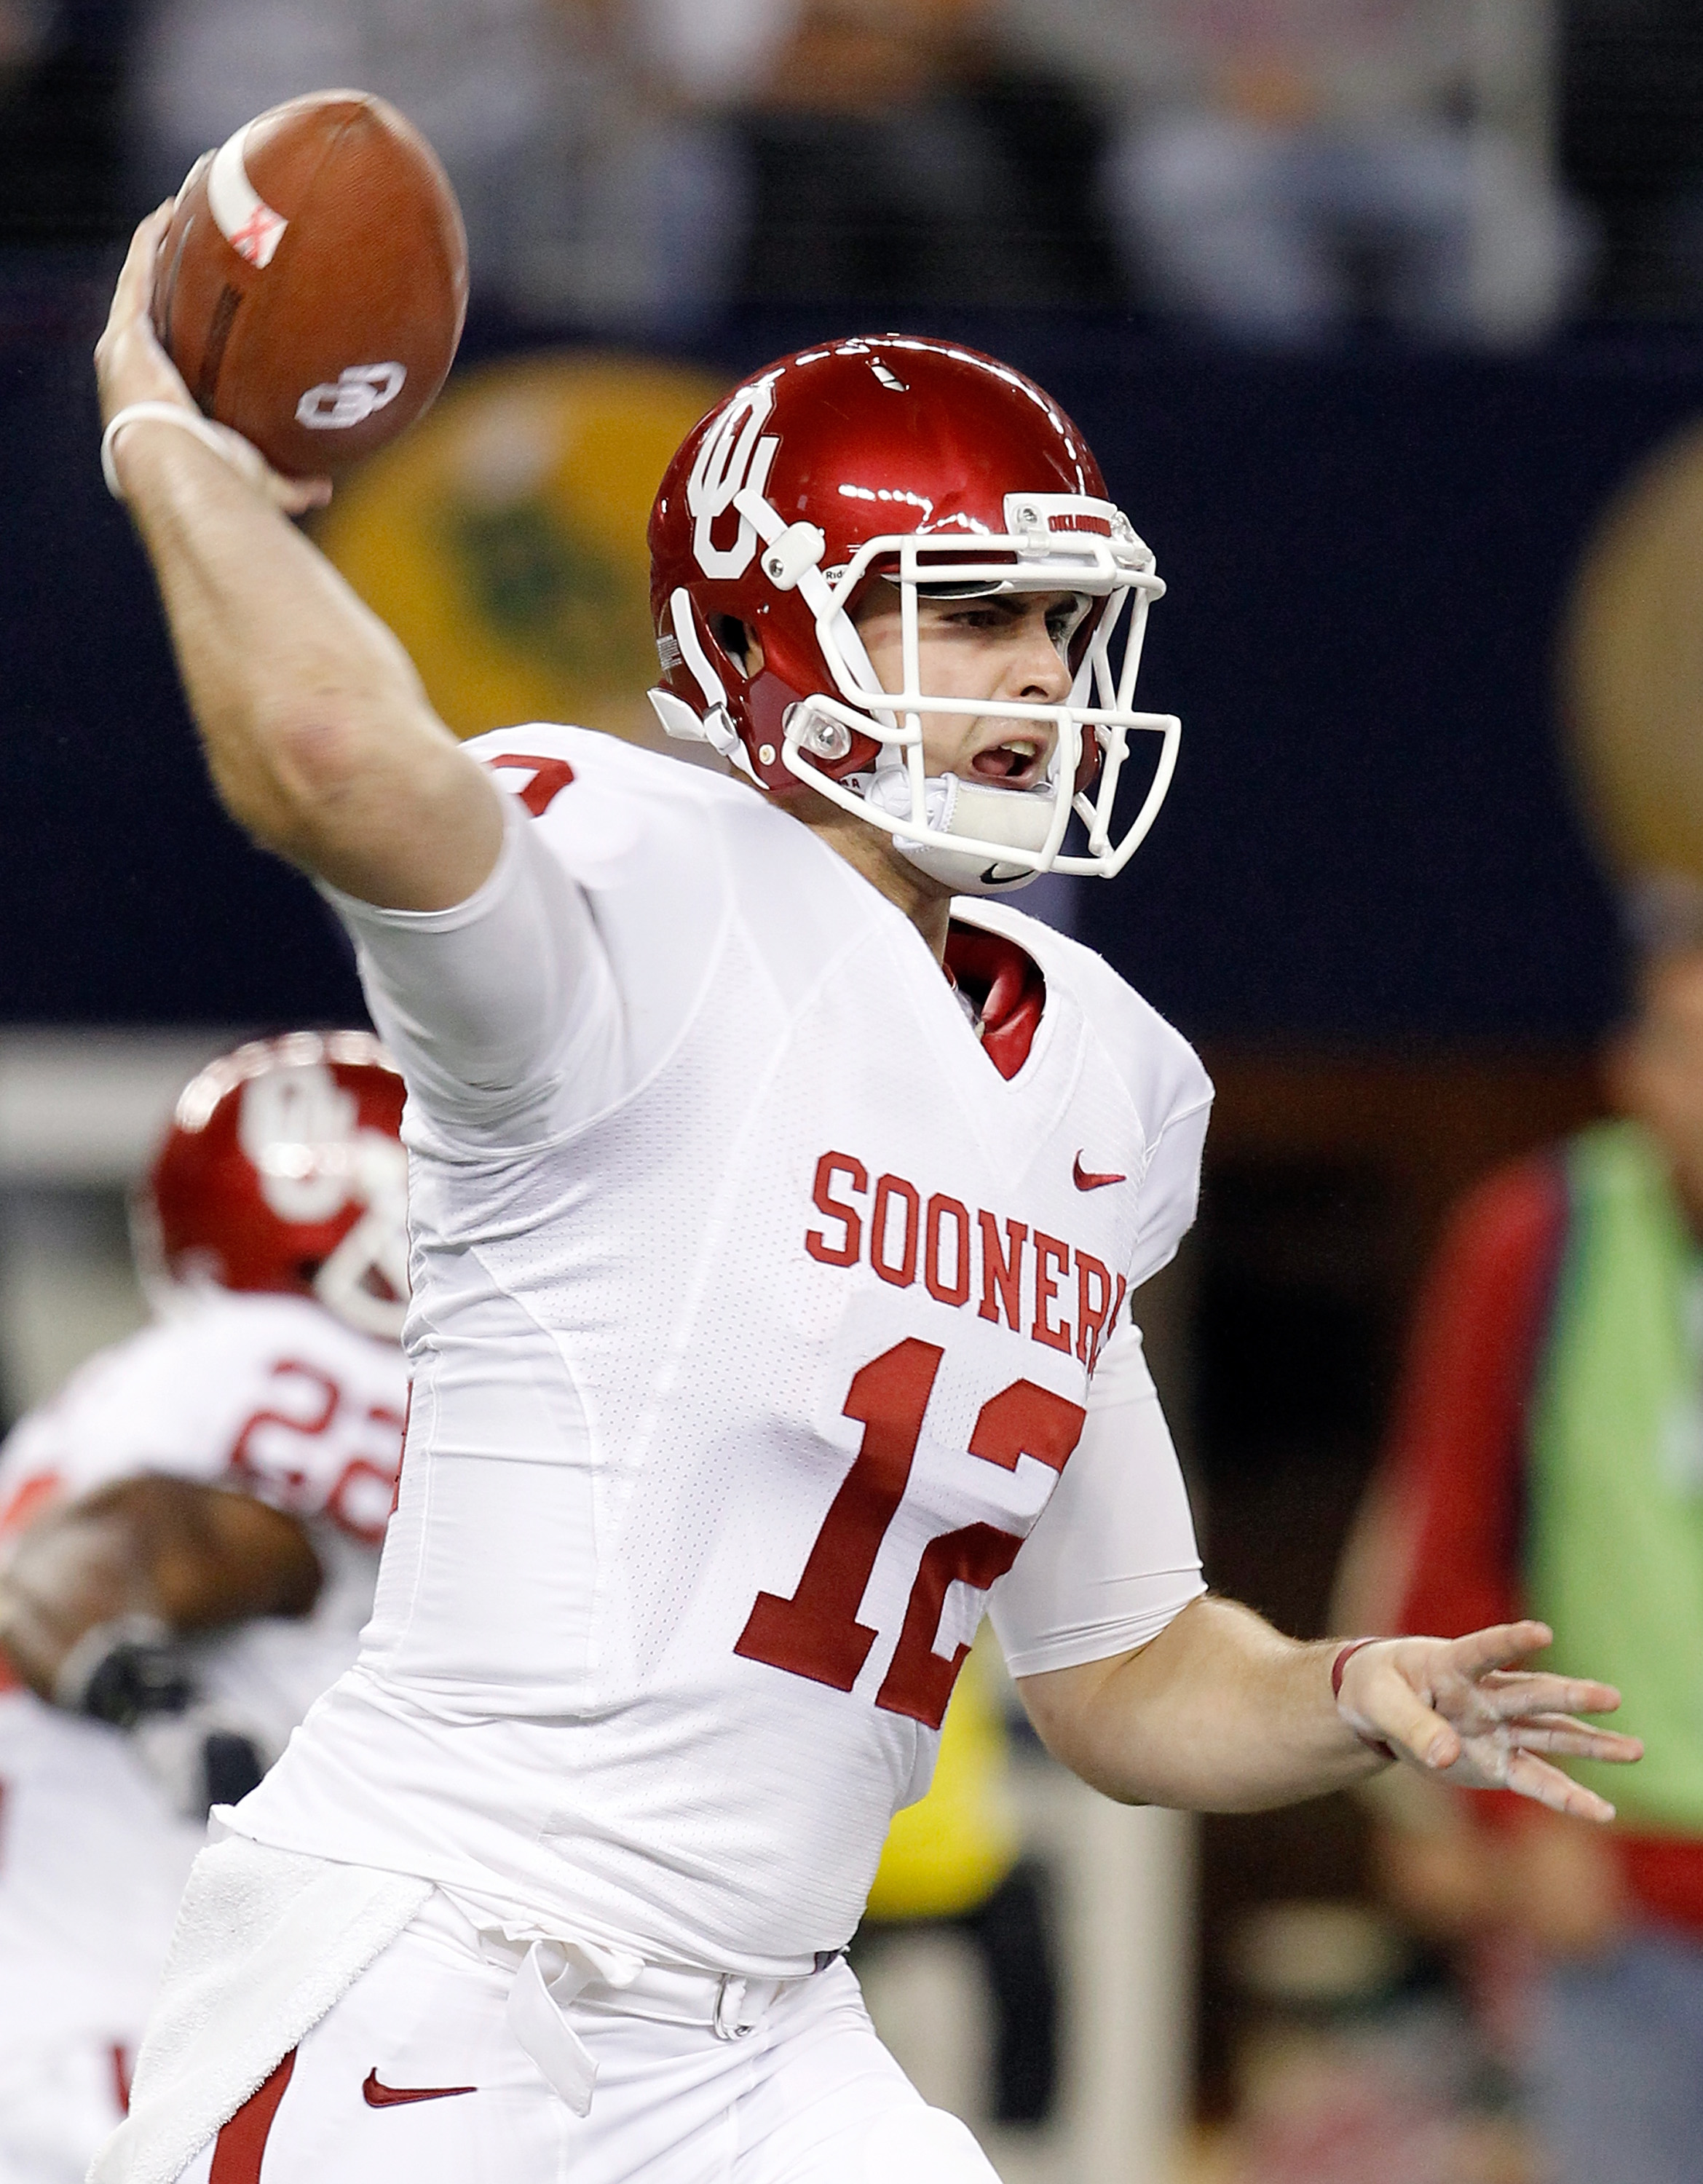 ARLINGTON, TX - DECEMBER 04:  Quarterback Landry Jones #12 of the Oklahoma Sooners looks for an open receiver against the Nebraska Cornhuskers at Cowboys Stadium on December 4, 2010 in Arlington, Texas.  The Sooners beat the Cornhuskers 23-20.  (Photo by